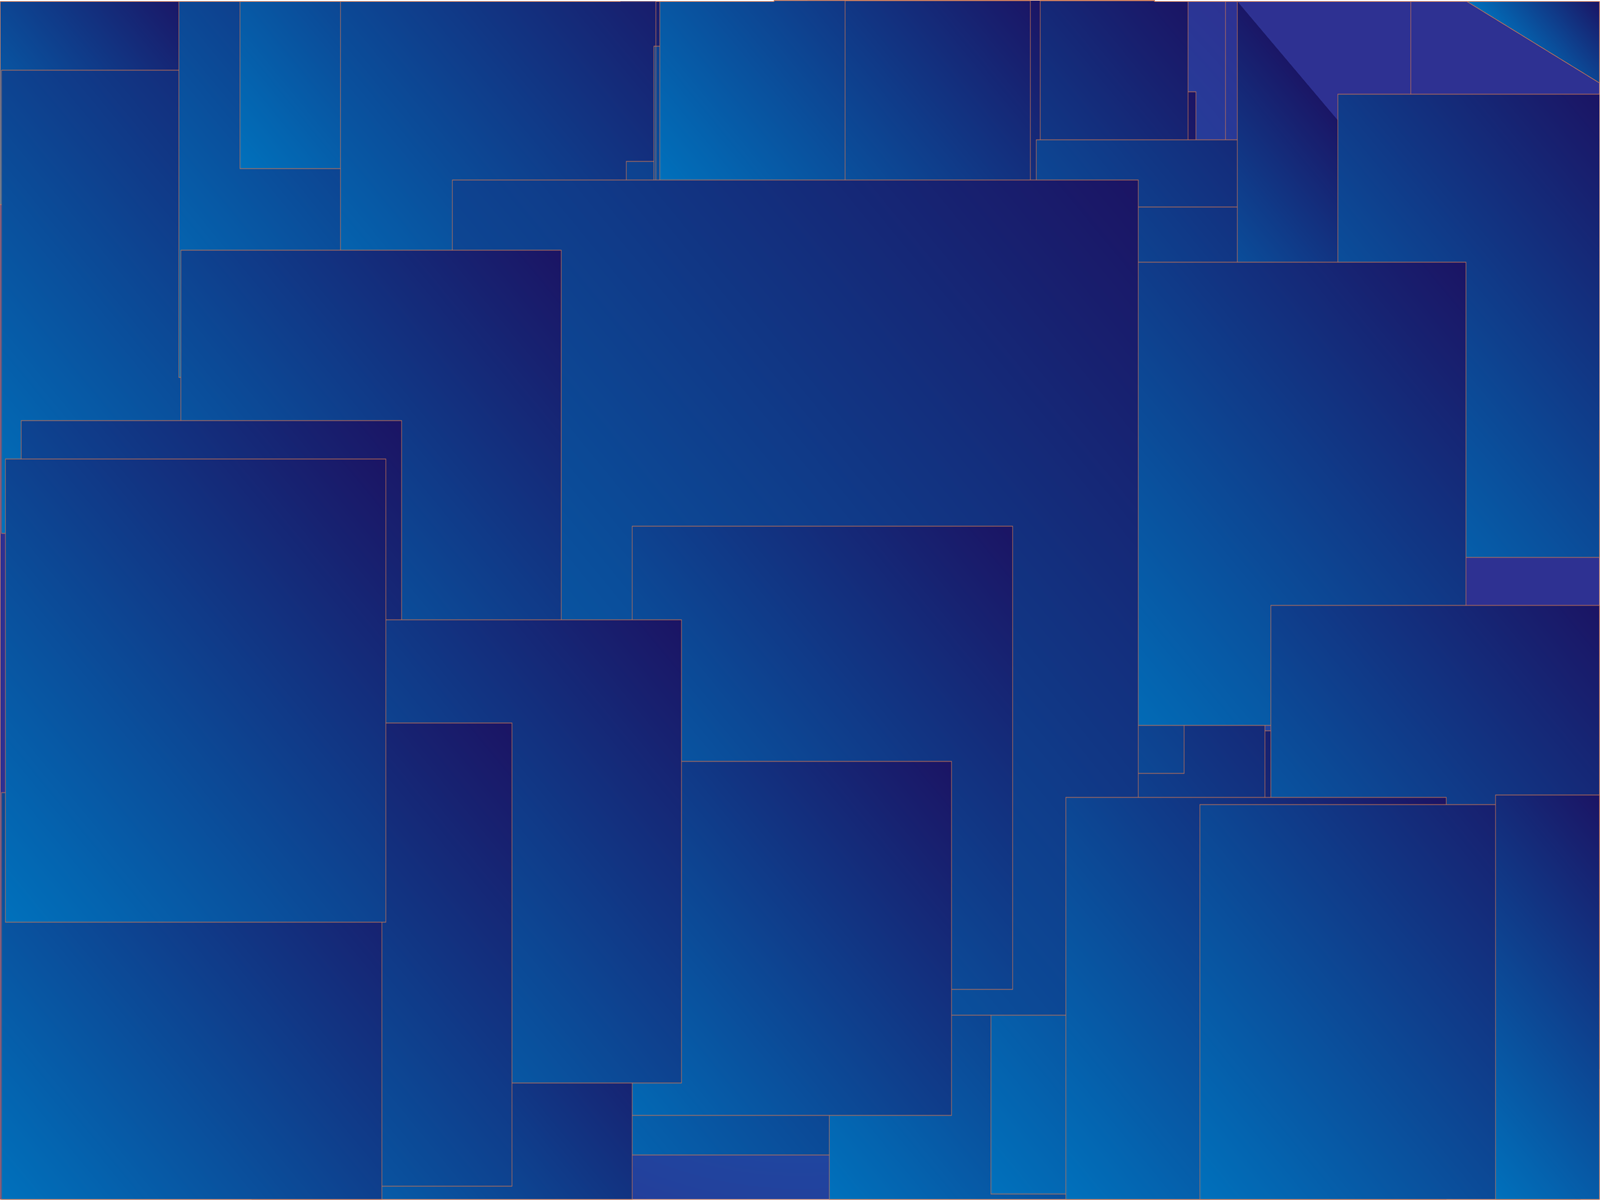 Blue Dynamic gradient background by Prya Design on Dribbble